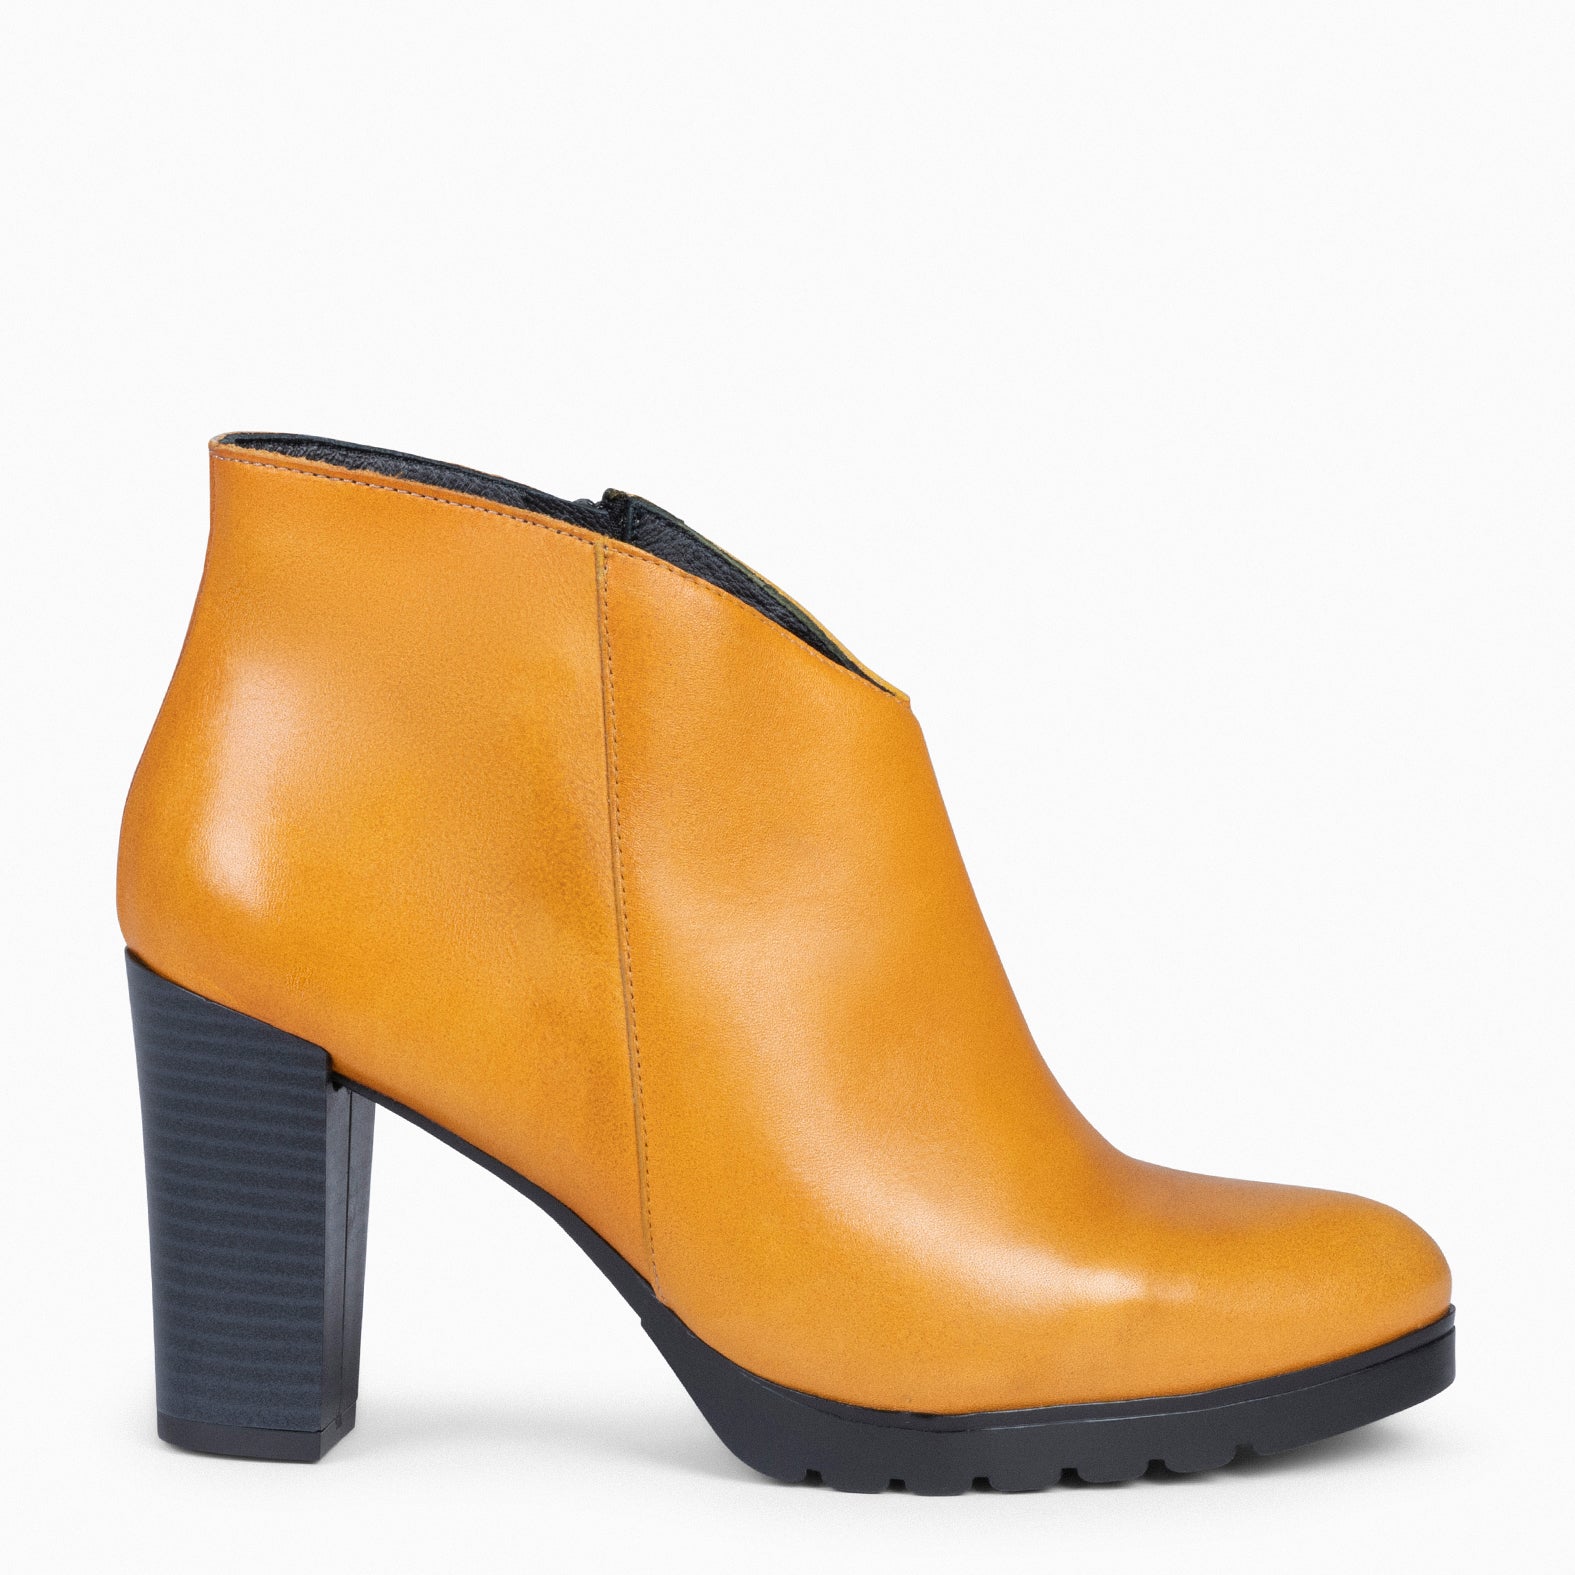 CLASSIC - YELLOW Women's Ankle Boots with heel